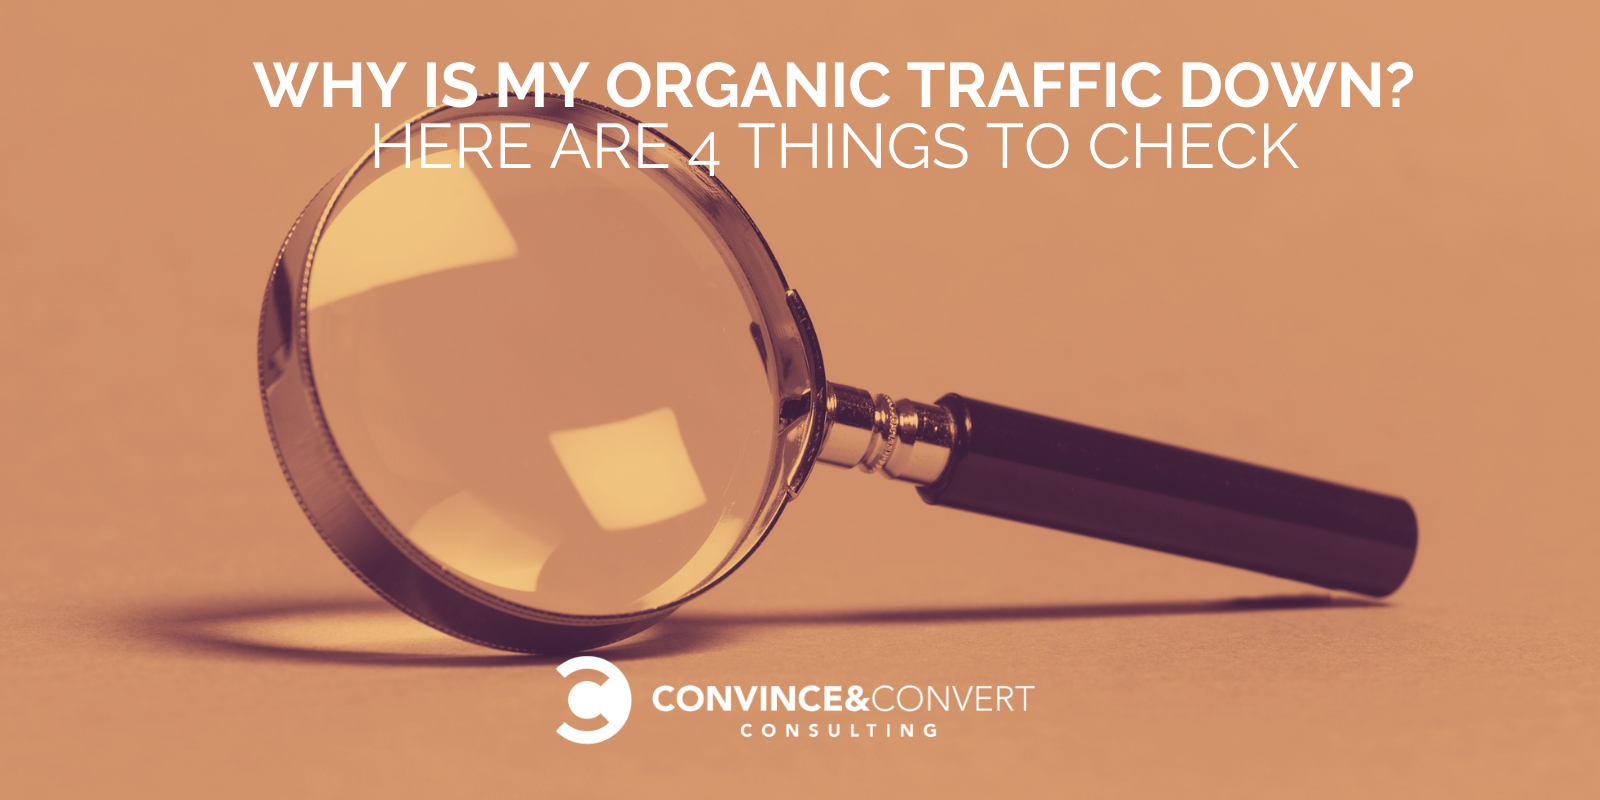 You are currently viewing Why Is My Organic Traffic Down? Here Are 4 Things to Check